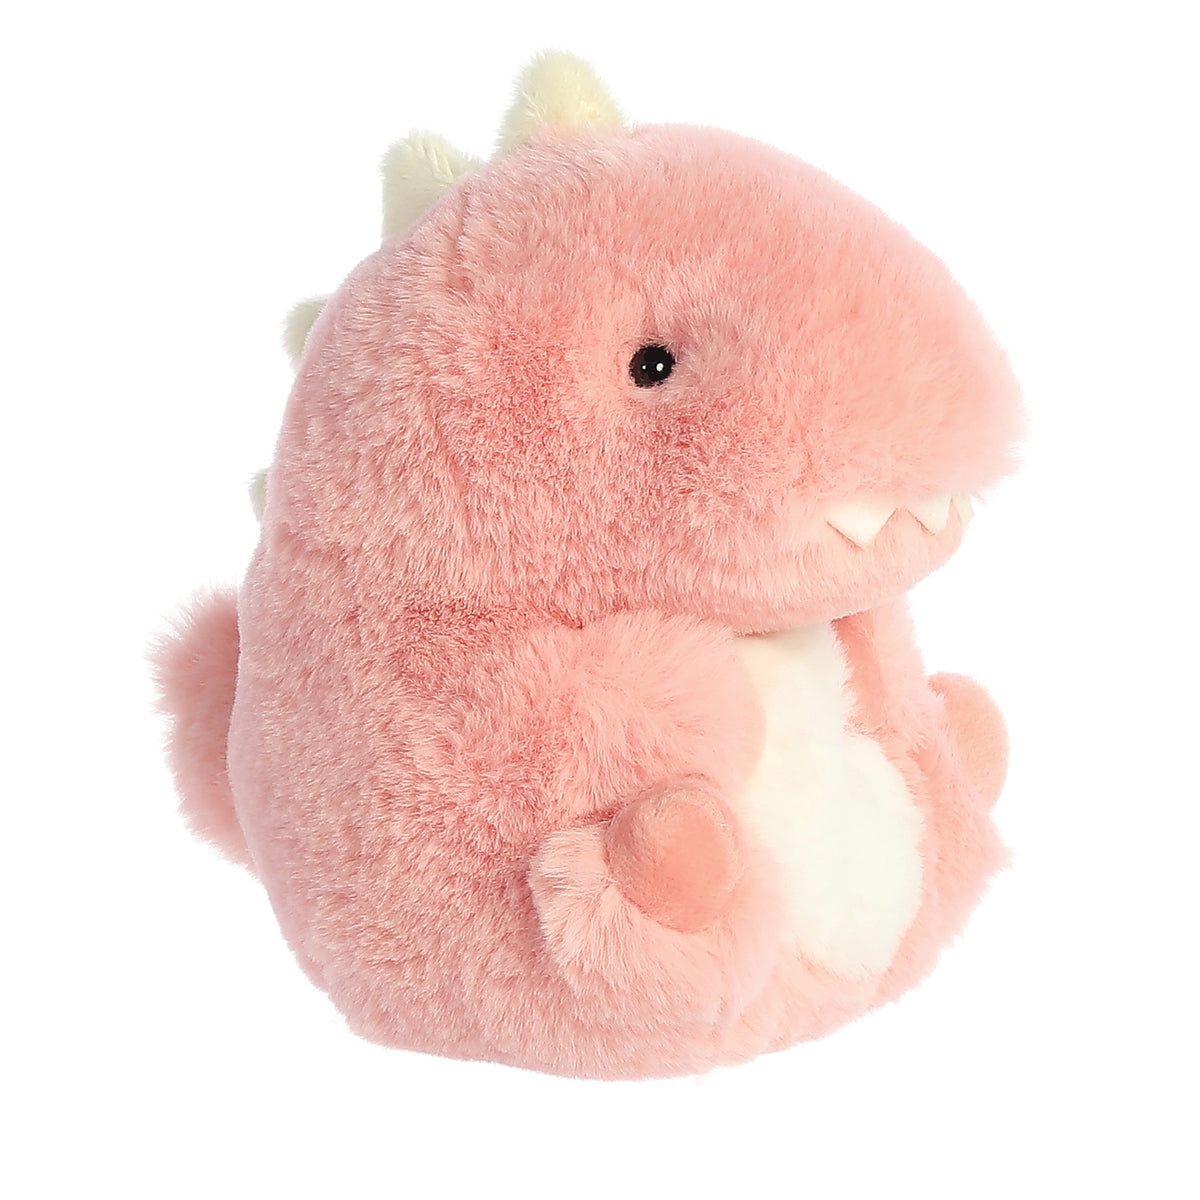 A pink plush dinosaur with stylish white-gold spikes, offering a huggable, adorable twist on a prehistoric creature.